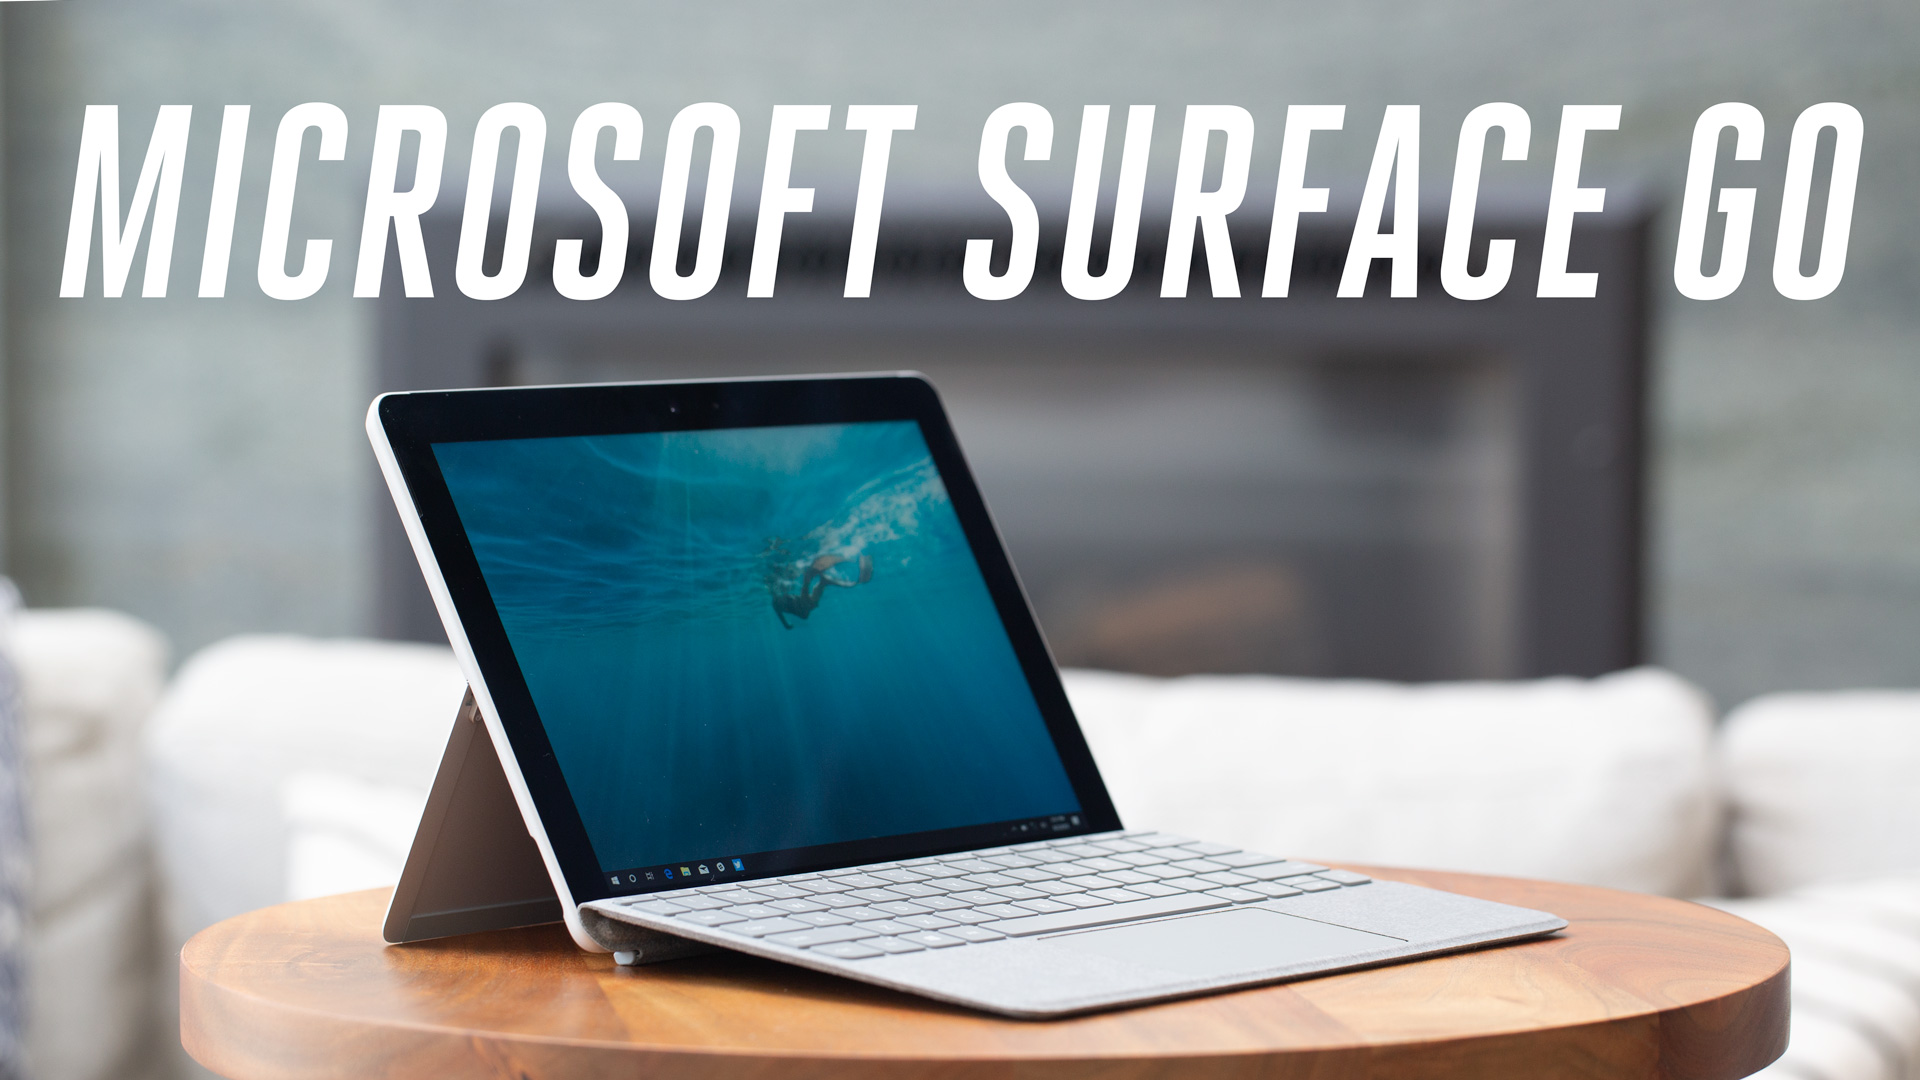 Surface Go specs, features, and tips - SurfaceTip